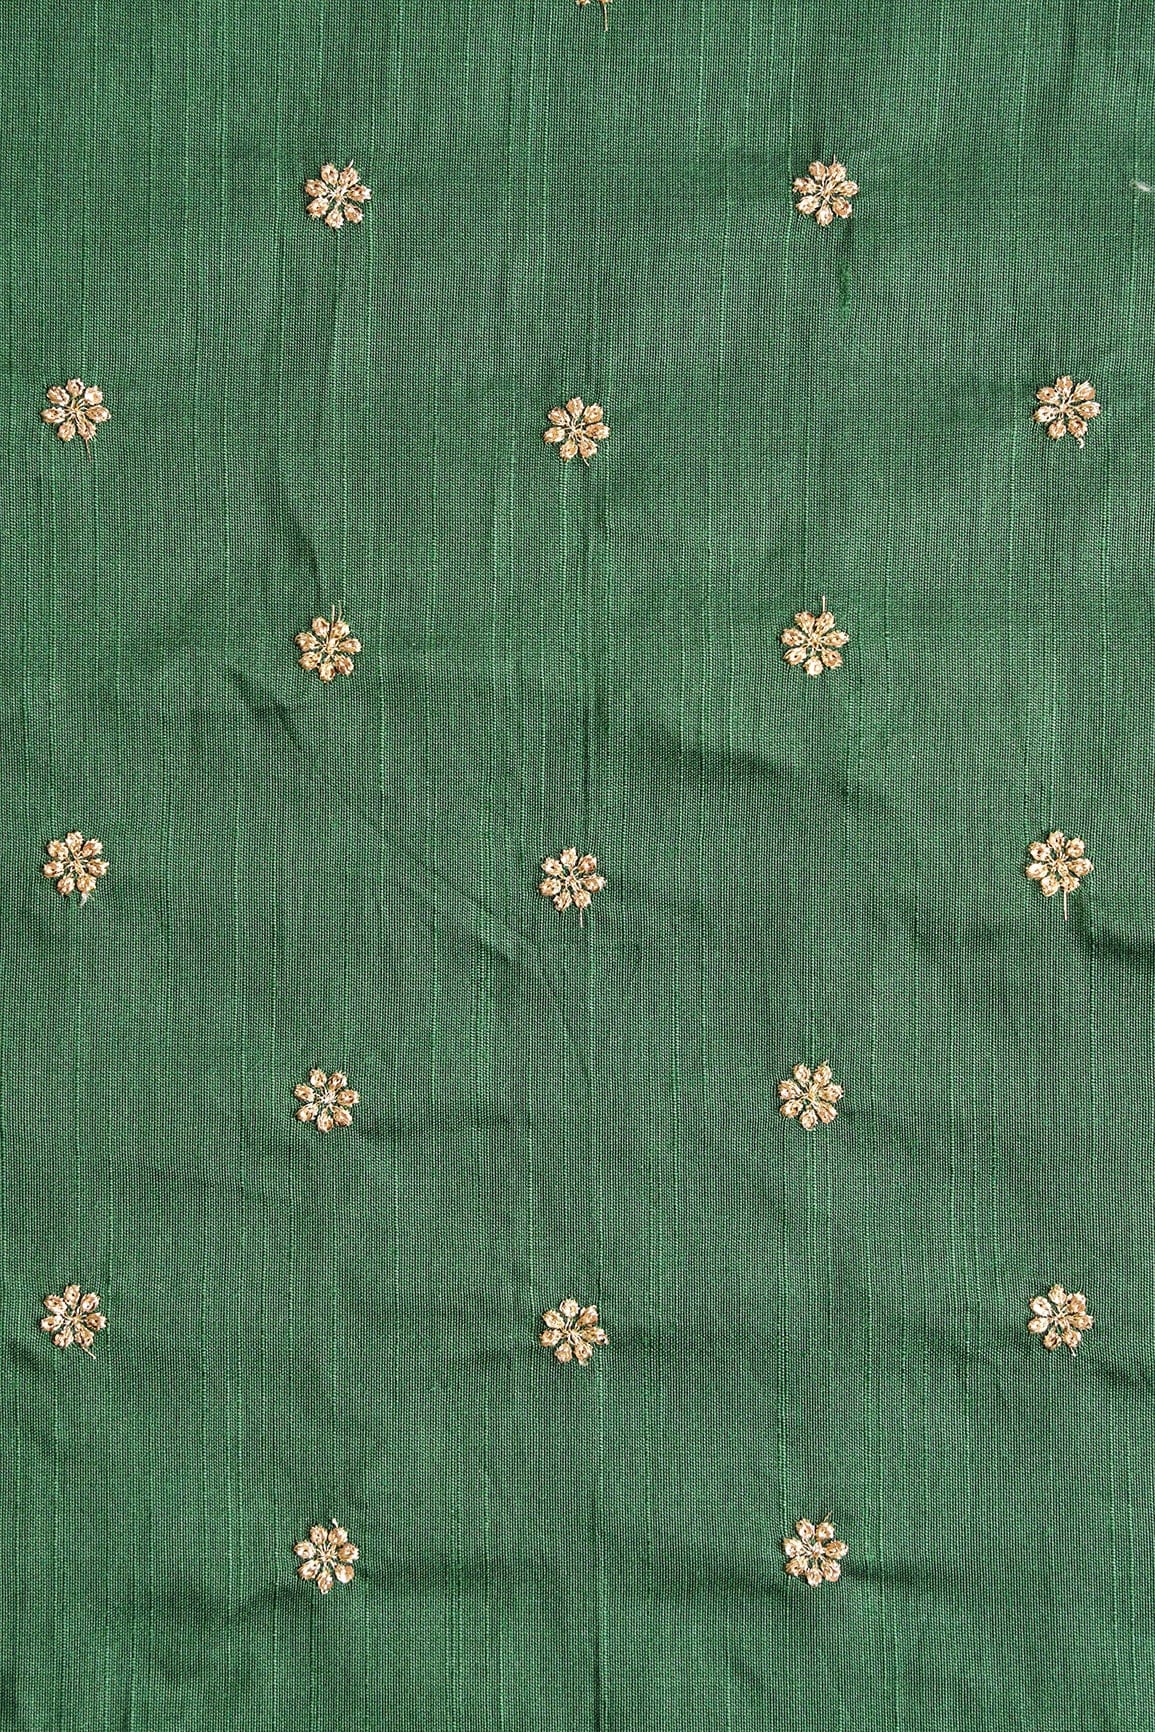 doeraa Embroidery Fabrics Gold Sequins With Gold Zari Small Motif Embroidery Work On Bottle Green Raw Silk Fabric